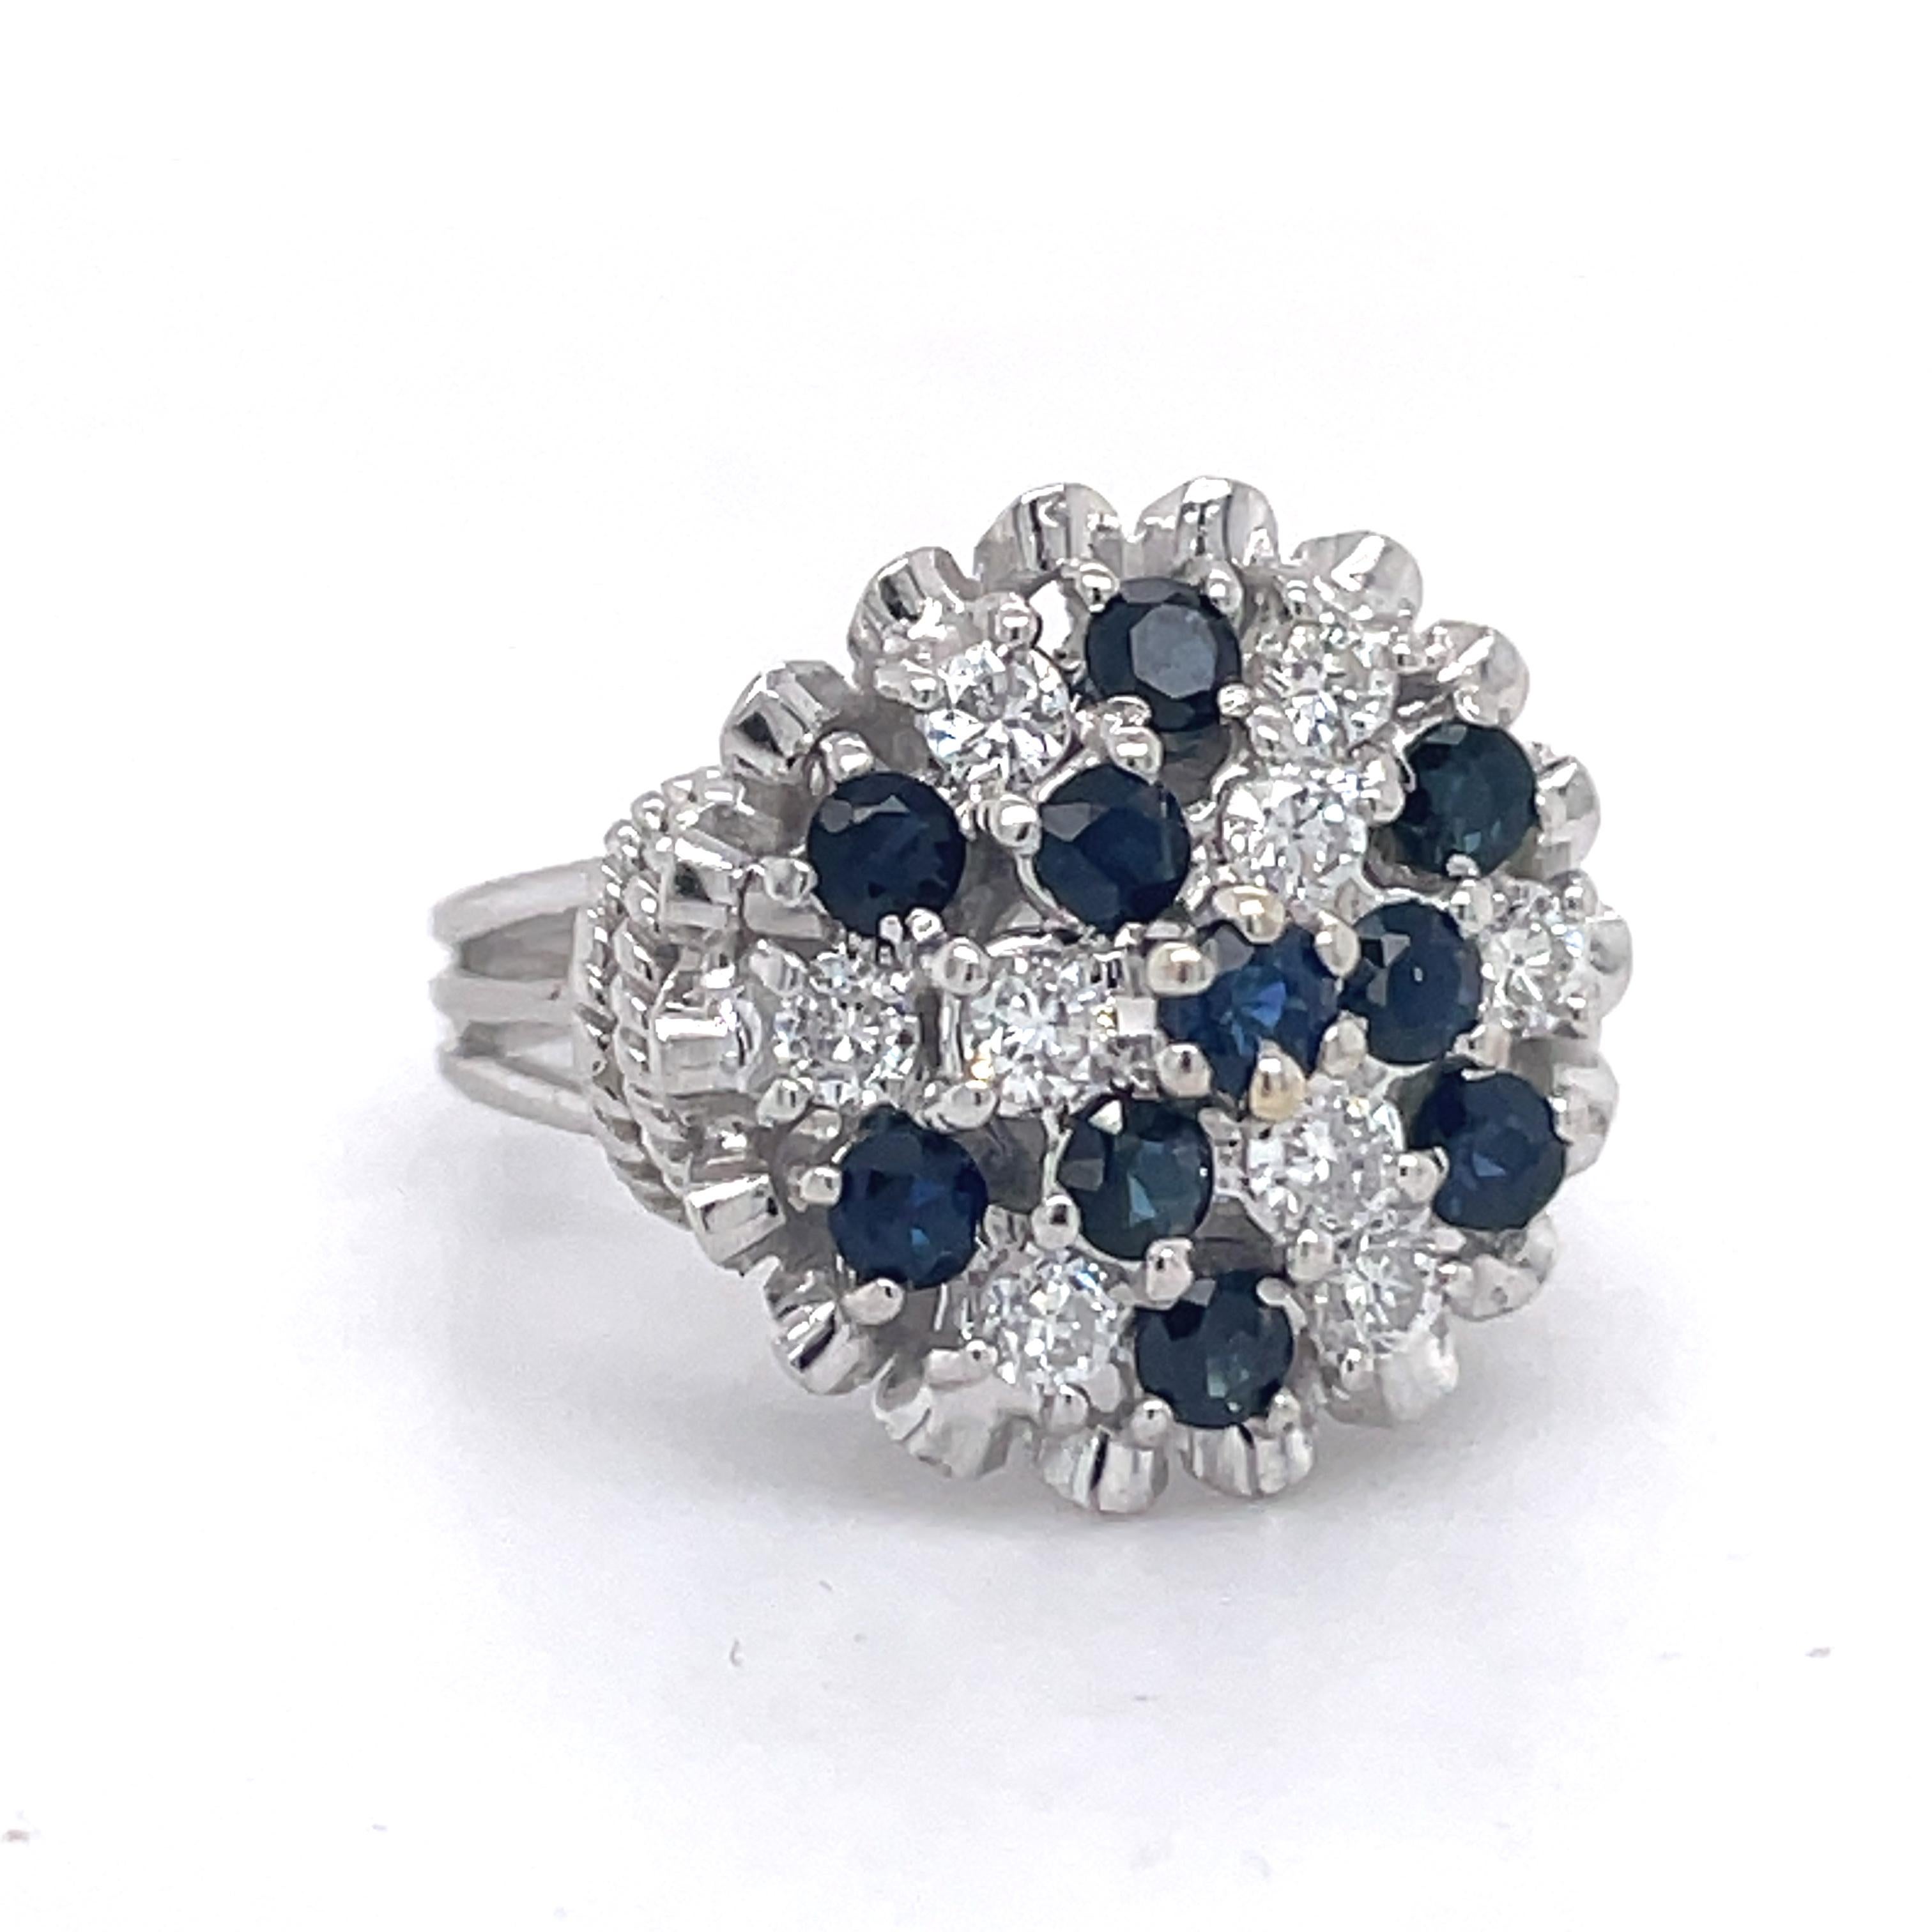 Statement Cocktail Ring - 0.5ct Sapphire and 0.5ct Diamond Ring, 14K white gold  In Excellent Condition For Sale In Ramat Gan, IL